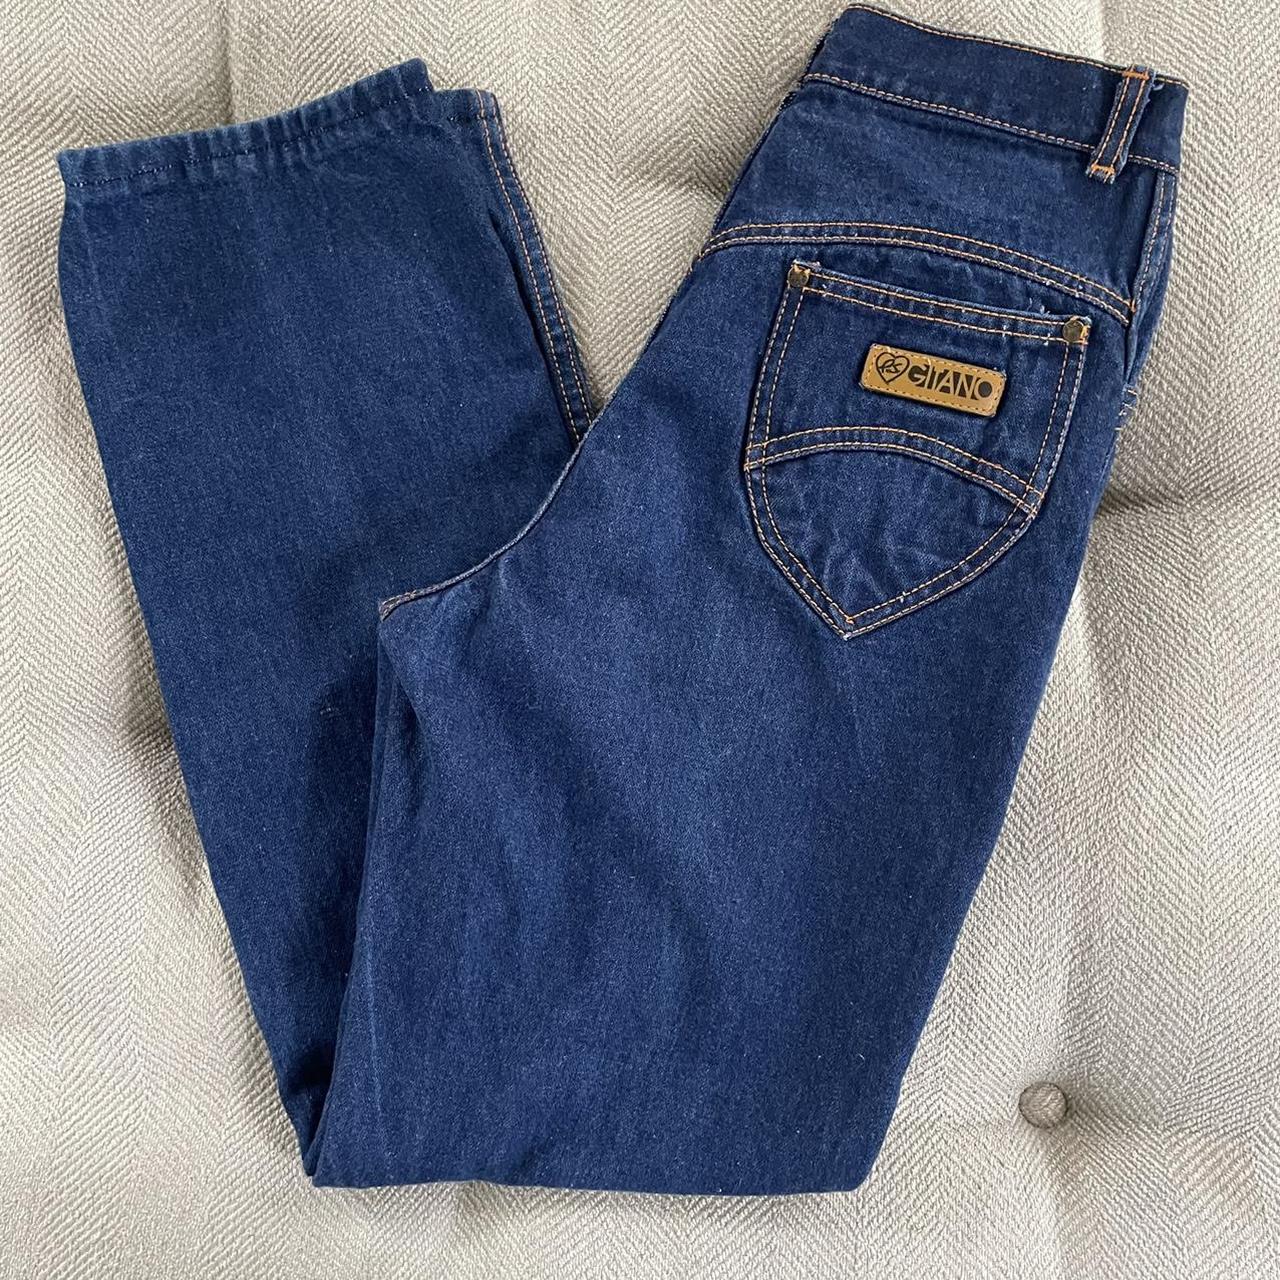 Straight from the 80s, PS Guetano dark blue... - Depop